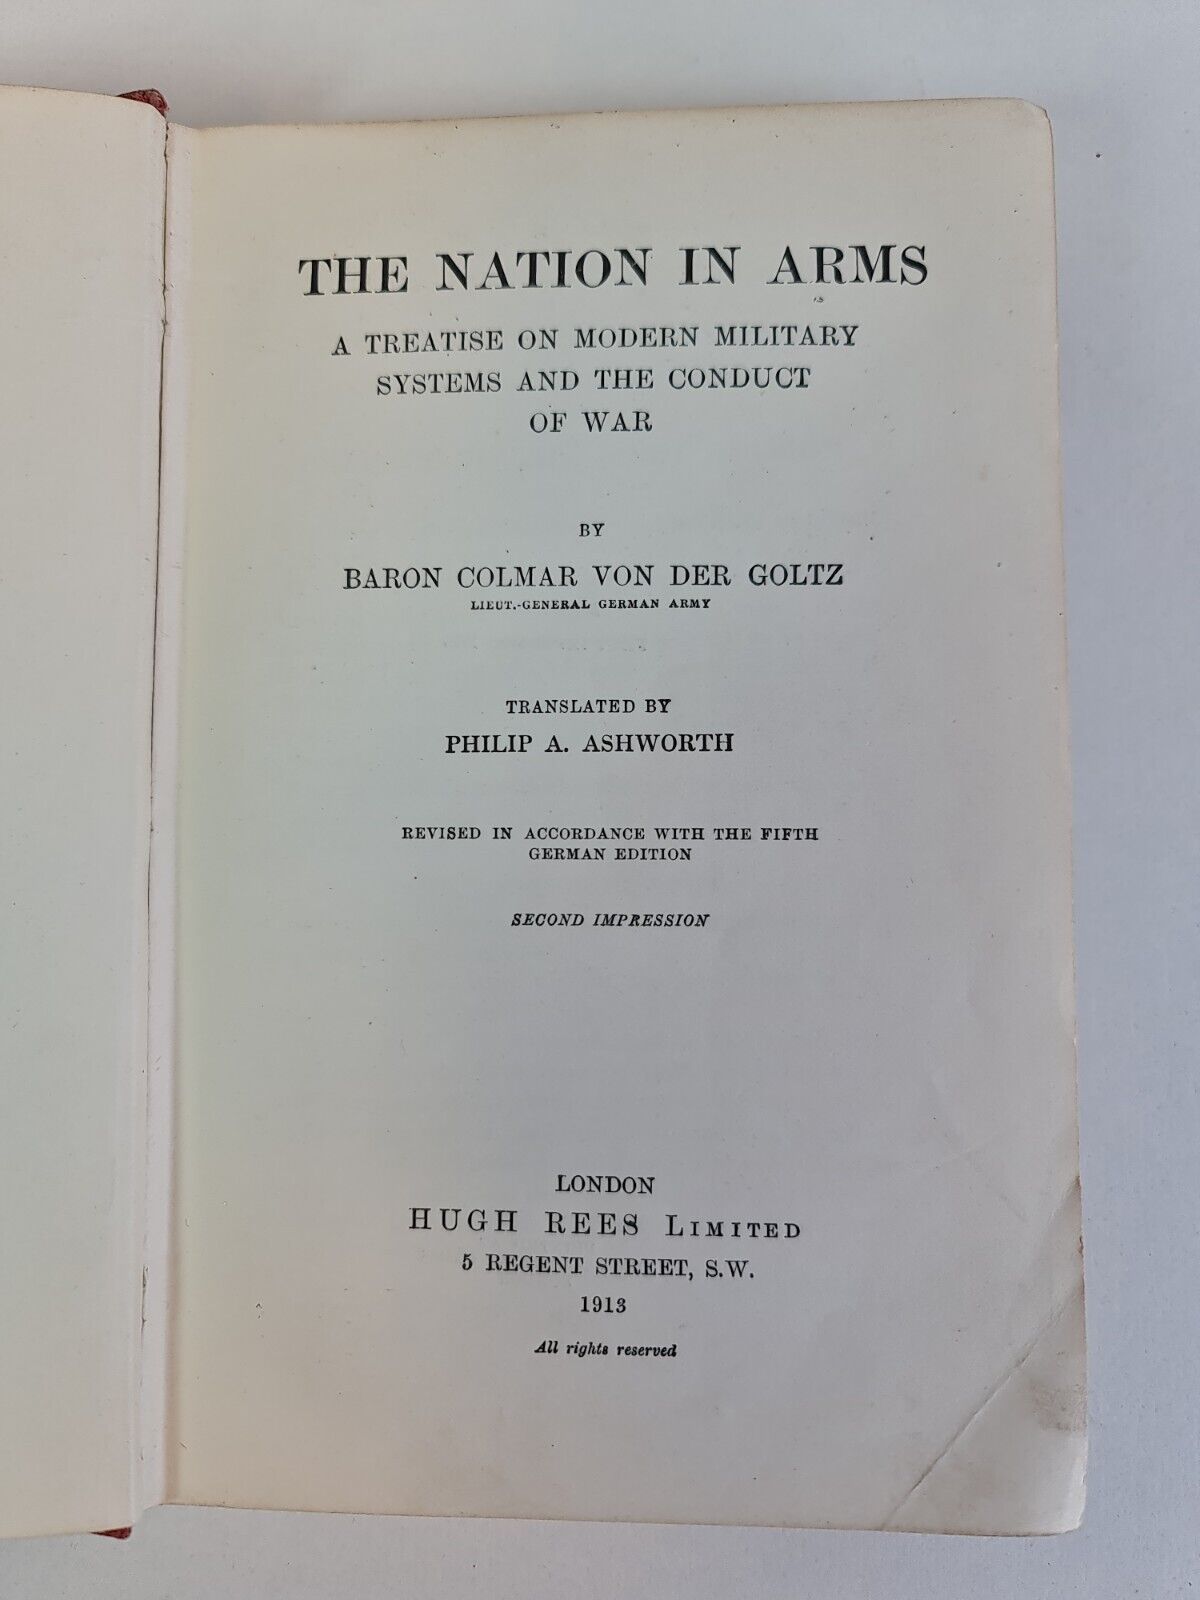 The Nation in Arms by Colmar Goltz (1913)